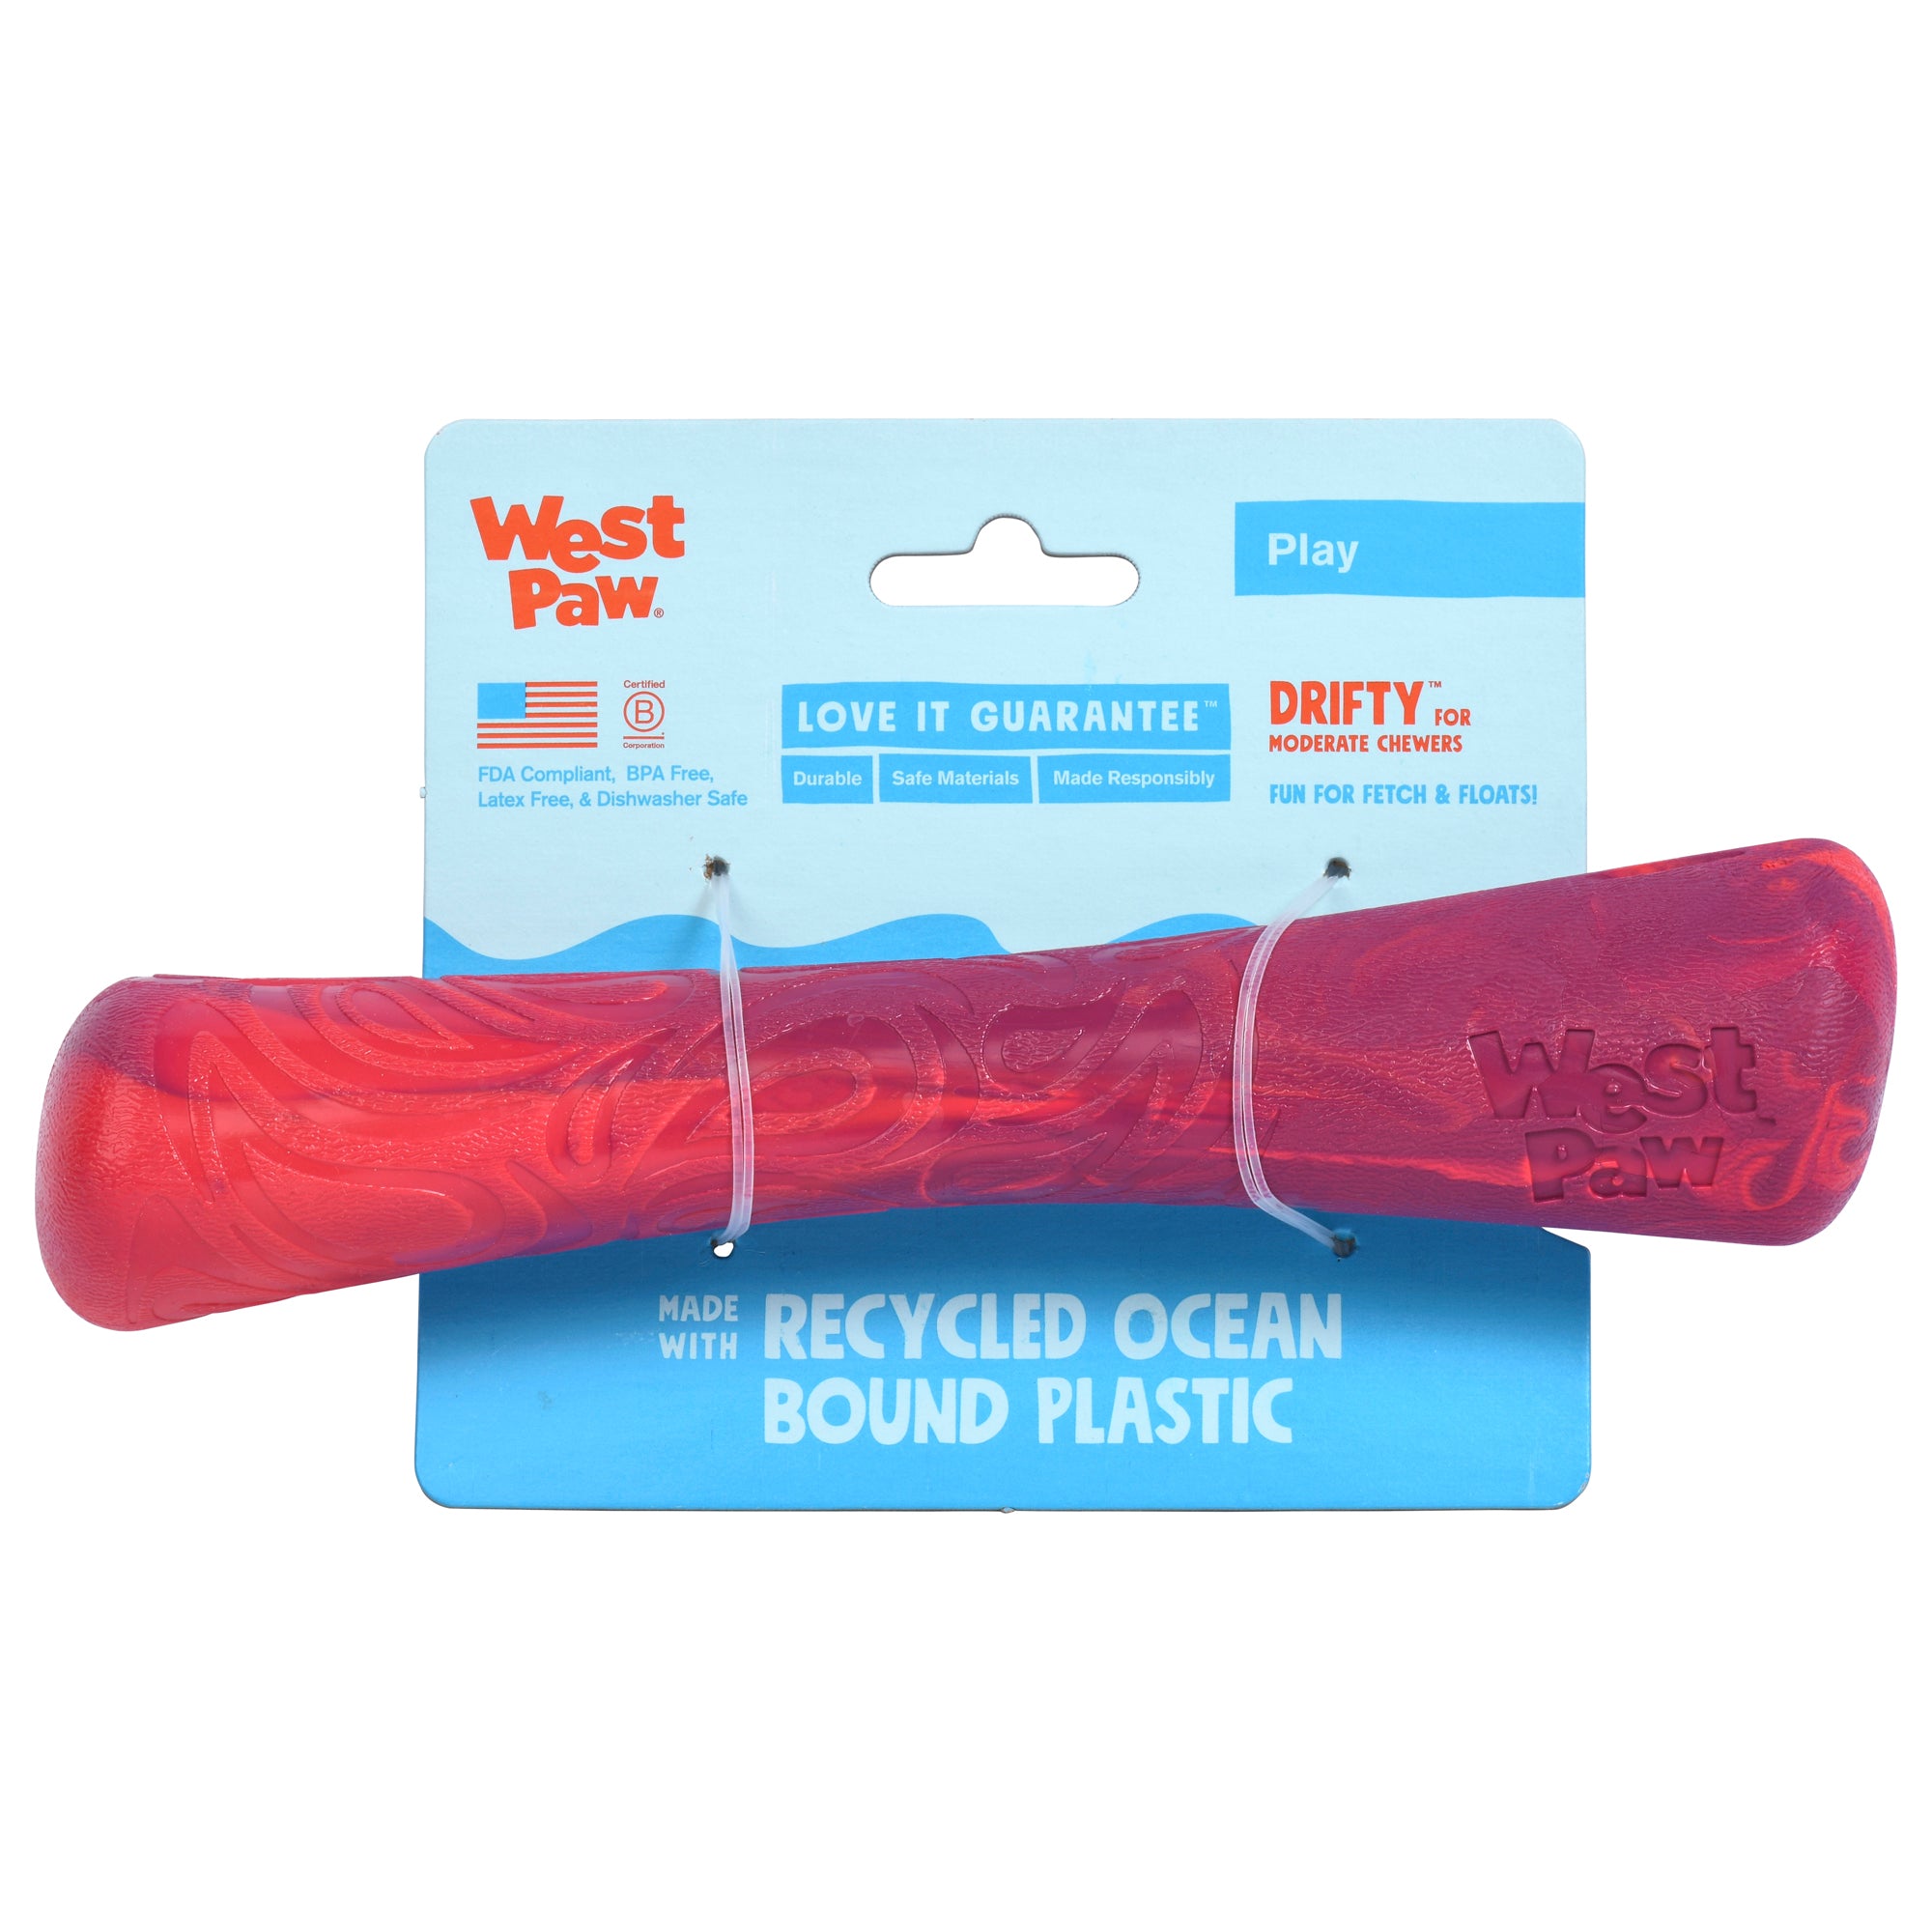 Drifty is a durable stick/bone shaped toy that is best suited for dogs who like to chew or play fetch. The bulbous ends provide the perfect chunky chew zone and the shape makes it easy for dogs to carry around. Toy floats in water and has an ocean-inspired texture.